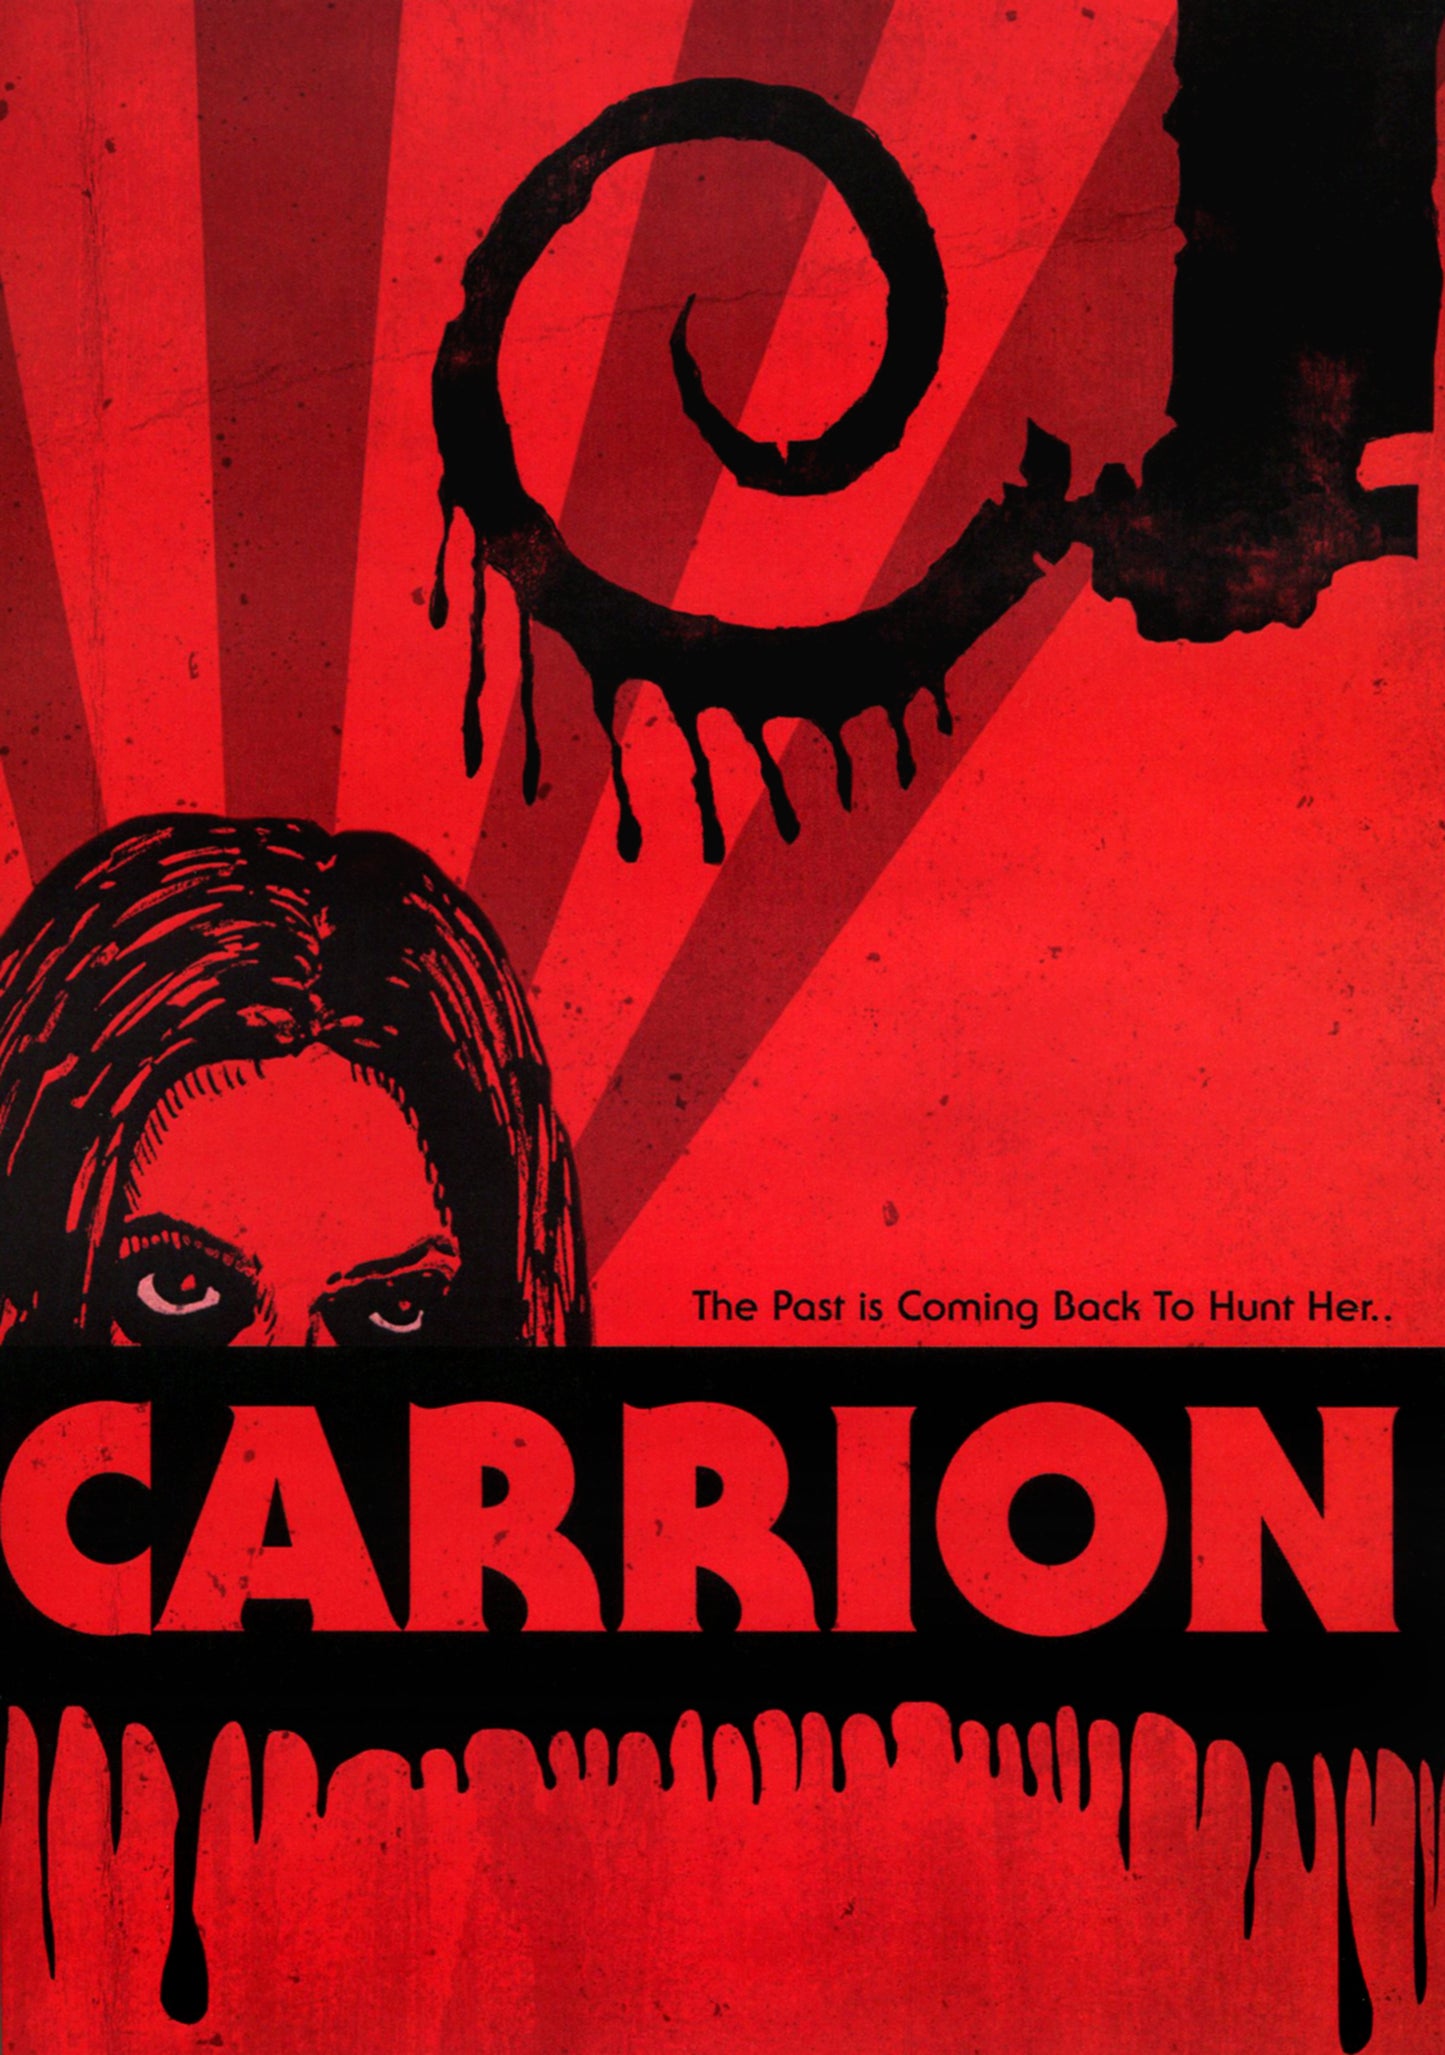 Carrion cover art